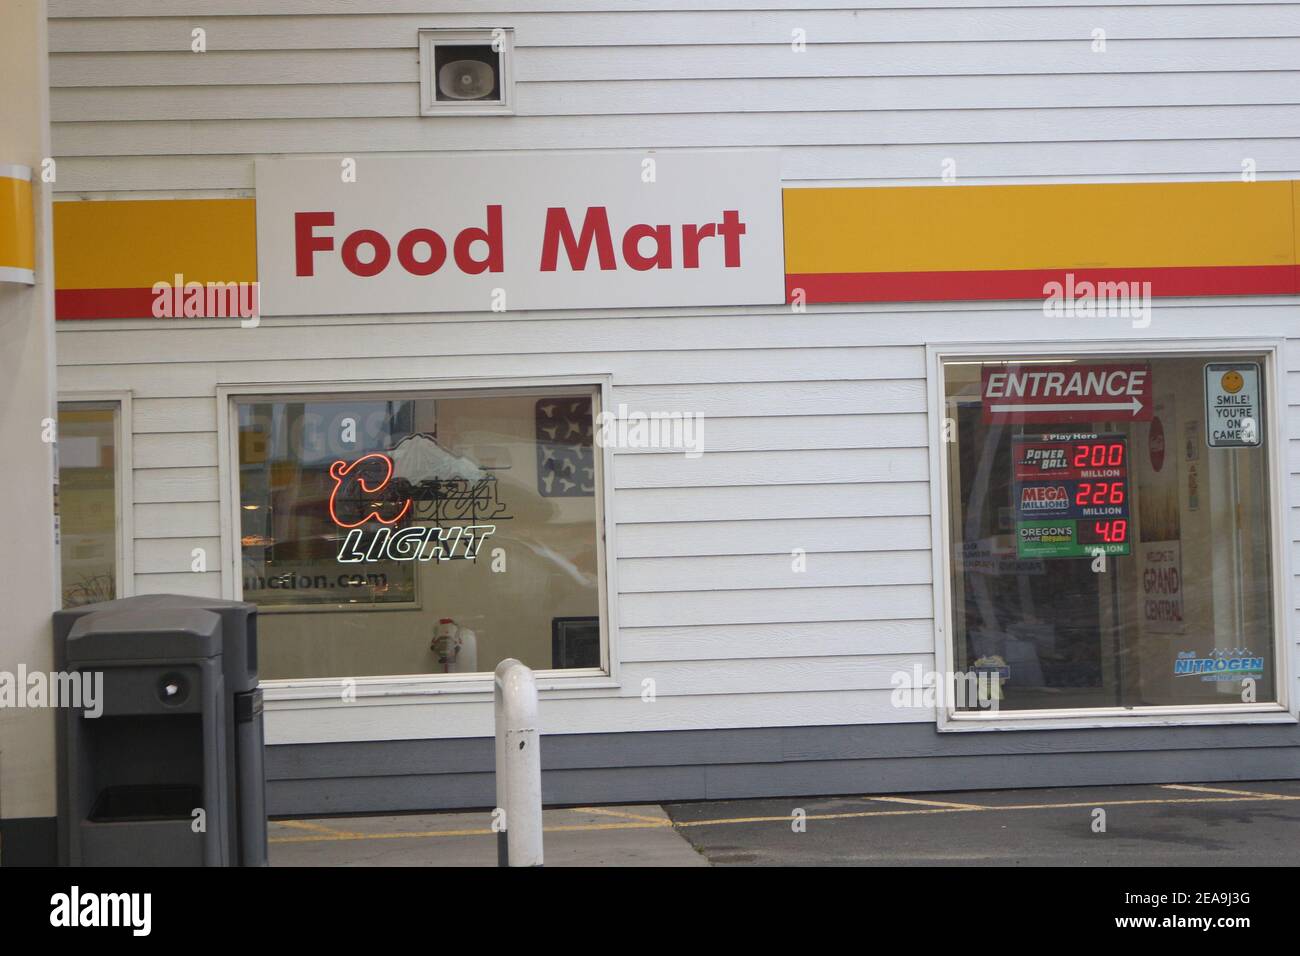 Food Mart High Resolution Stock Photography and Images - Alamy